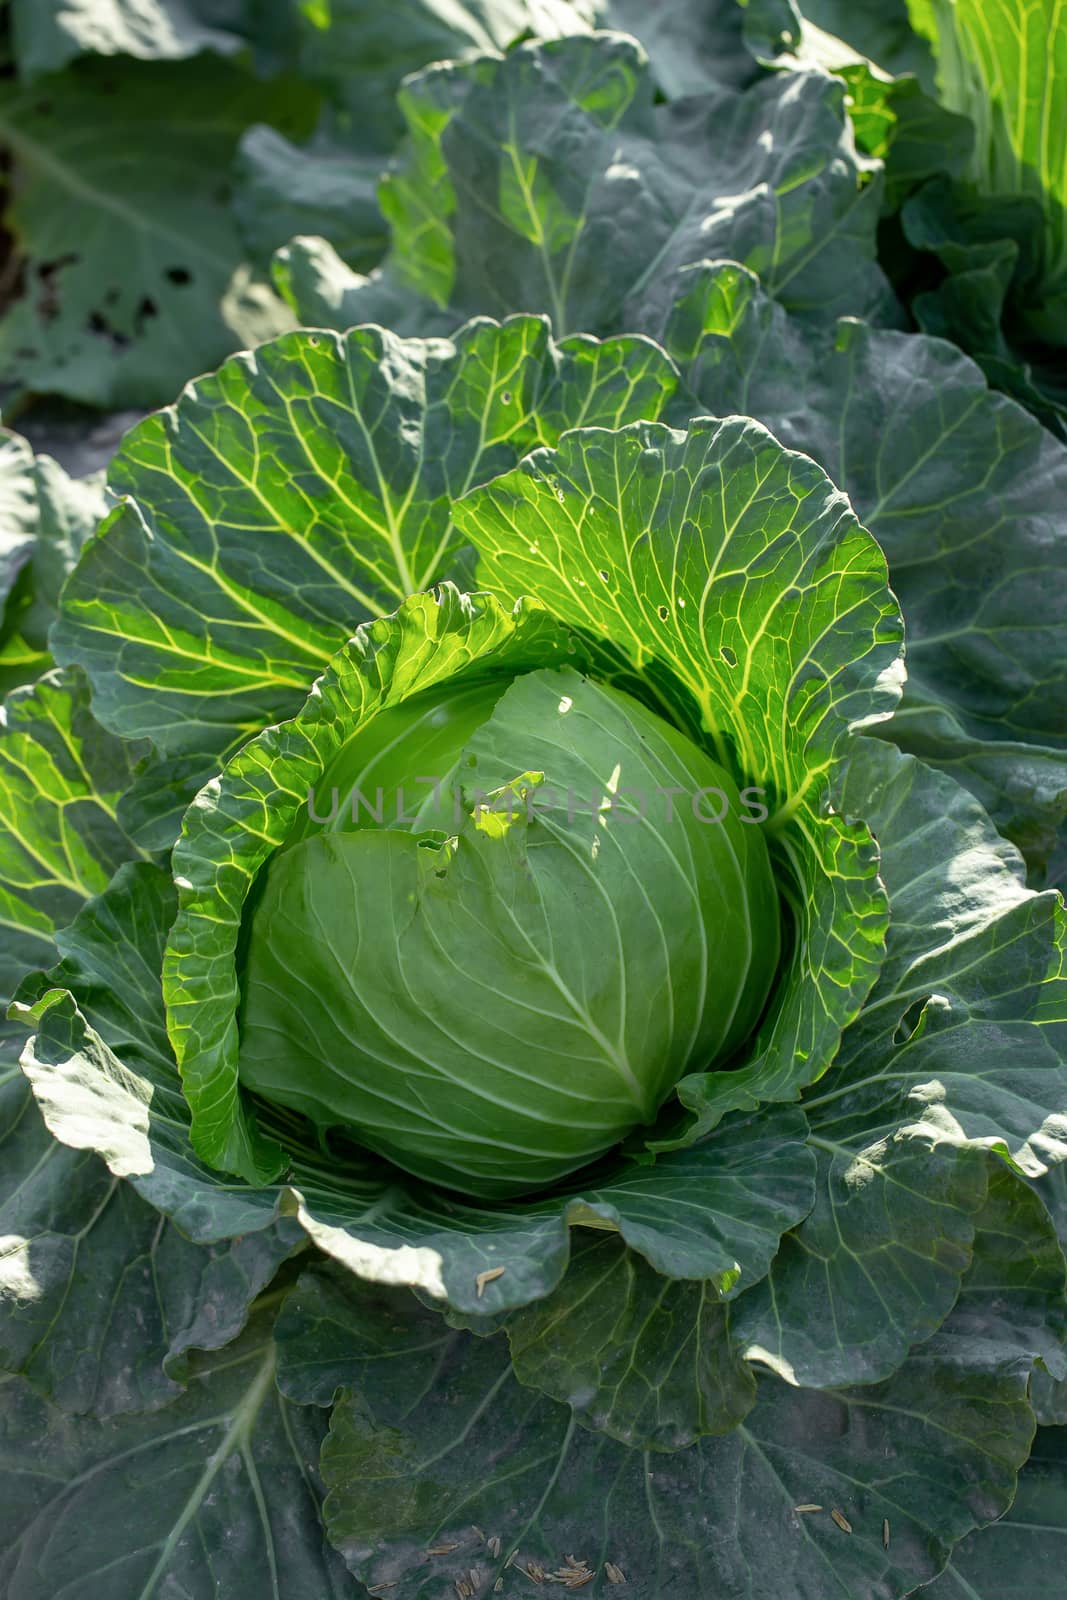 Fresh cabbage from farm field, cabbage in the garden by kaiskynet